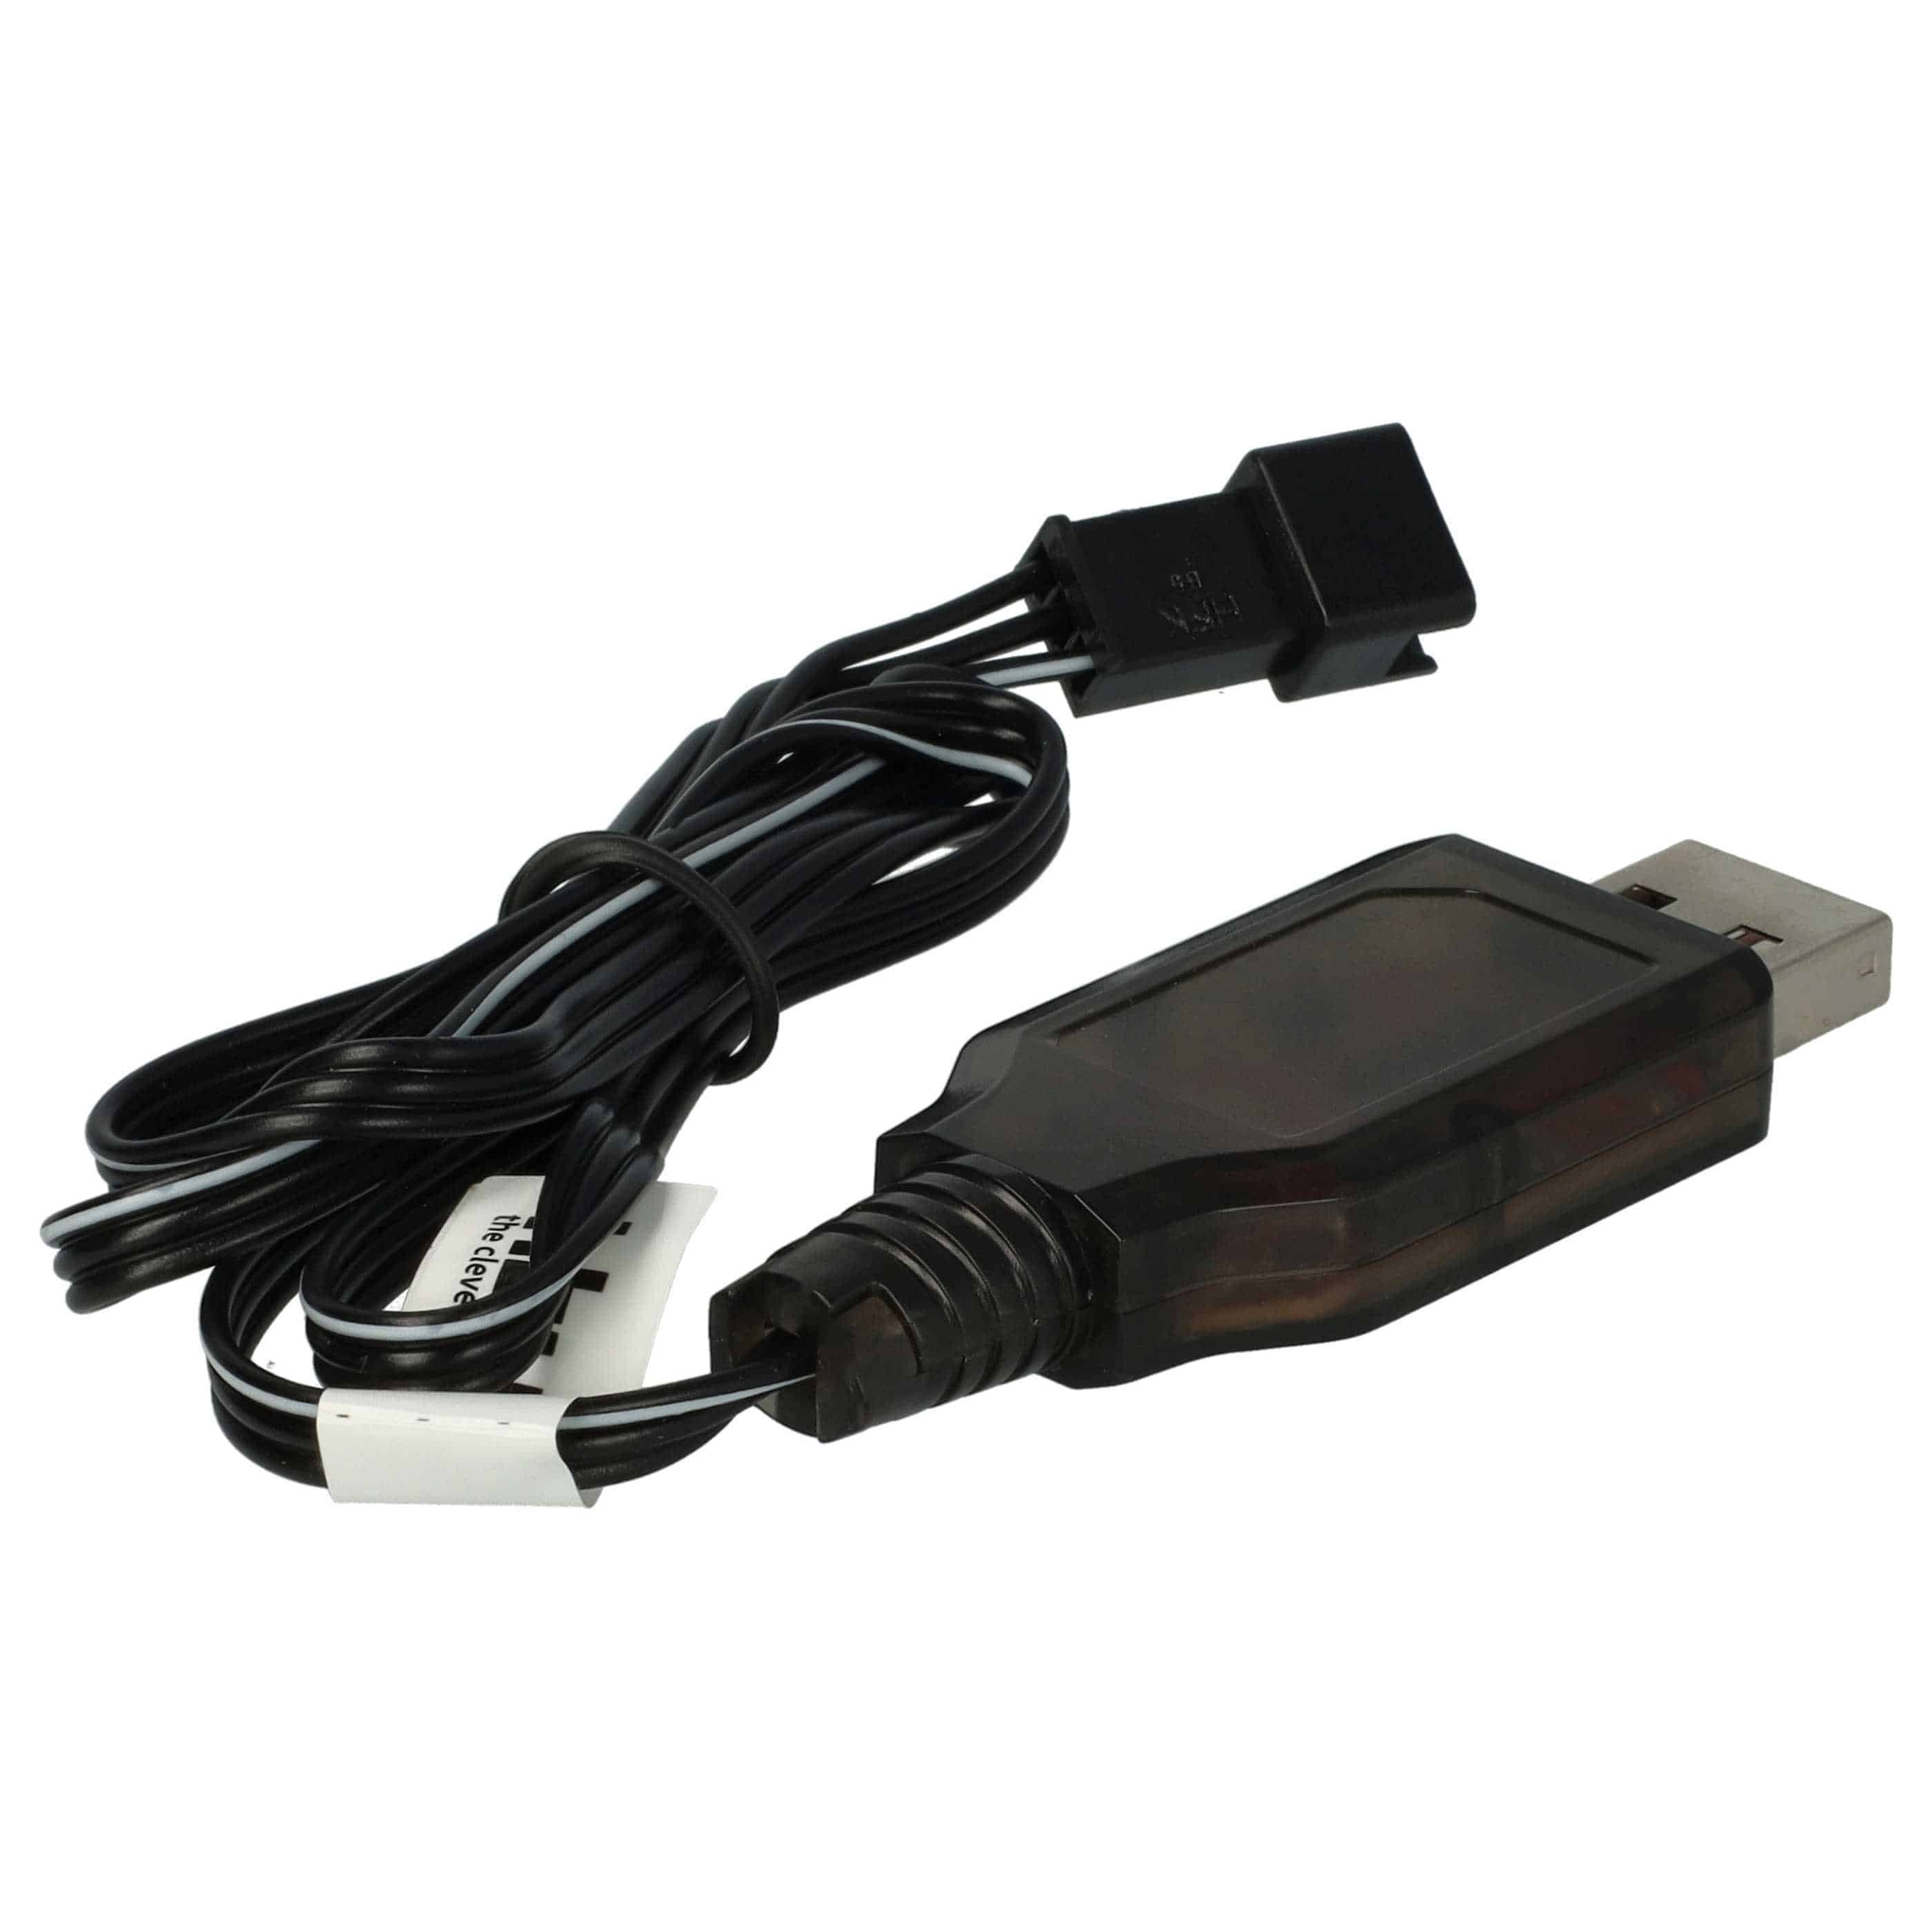 USB Charging Cable suitable for RC Batteries with SM-3P Connector, RC Model Making Battery Packs - 60 cm 6.4 V